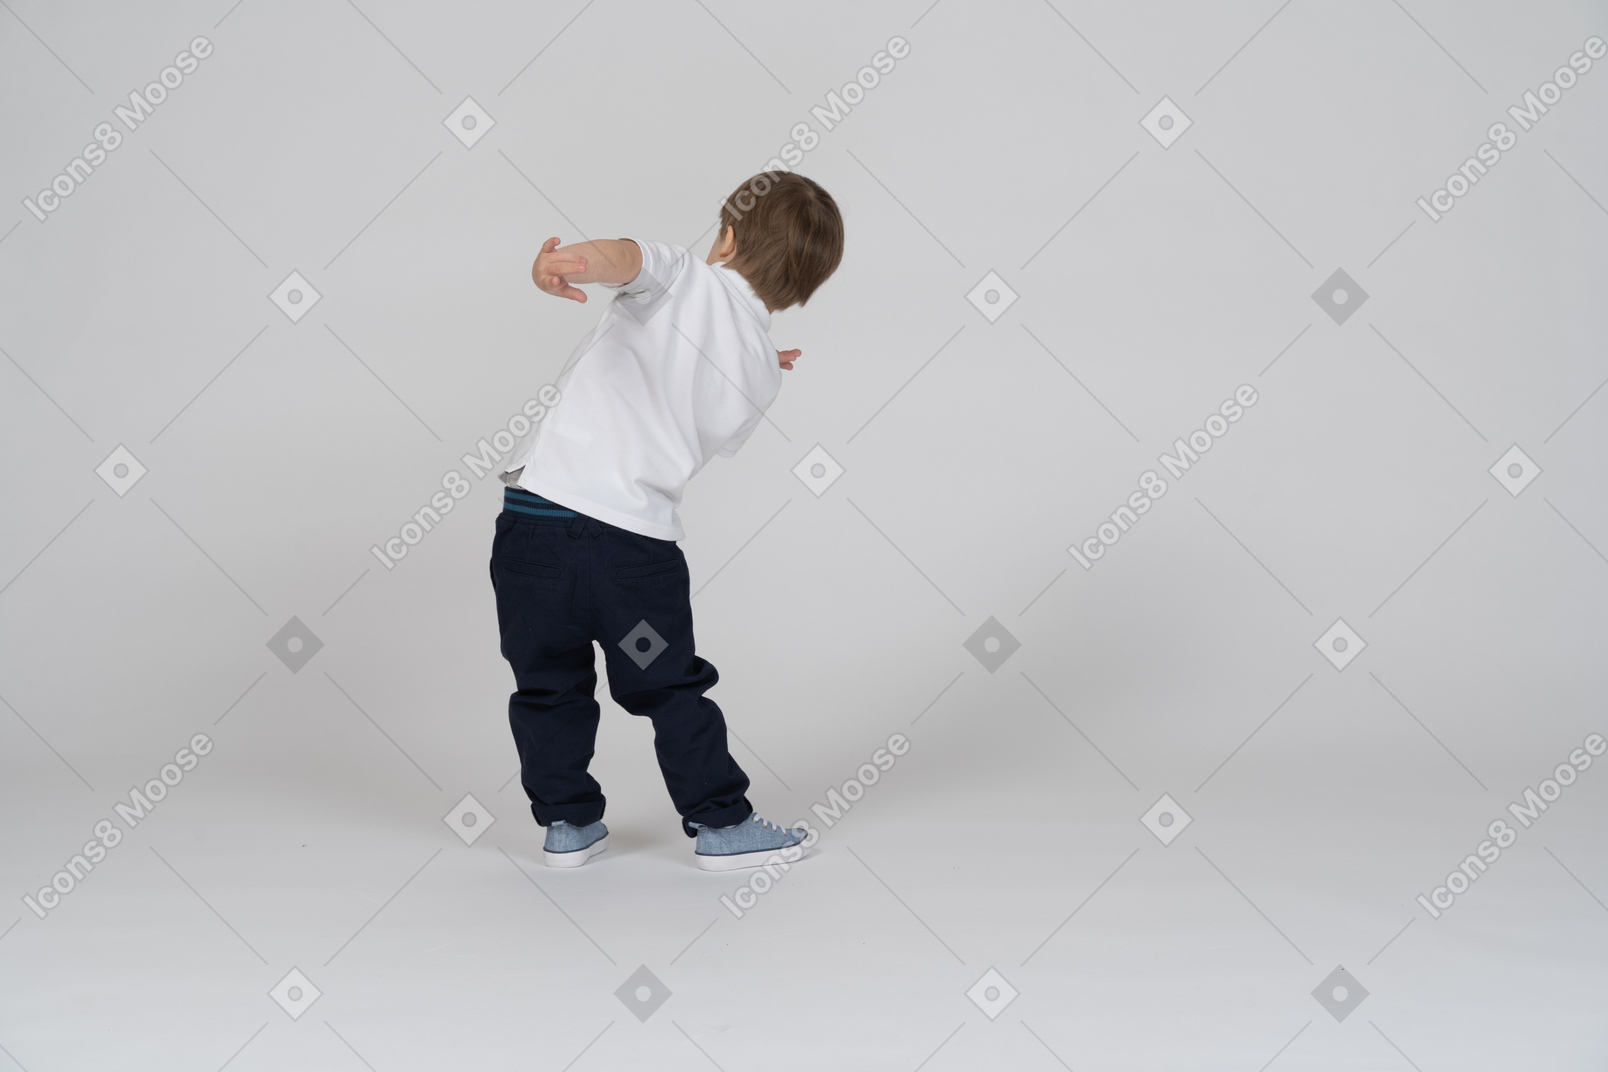 Back view of a boy extending one arm behind his back